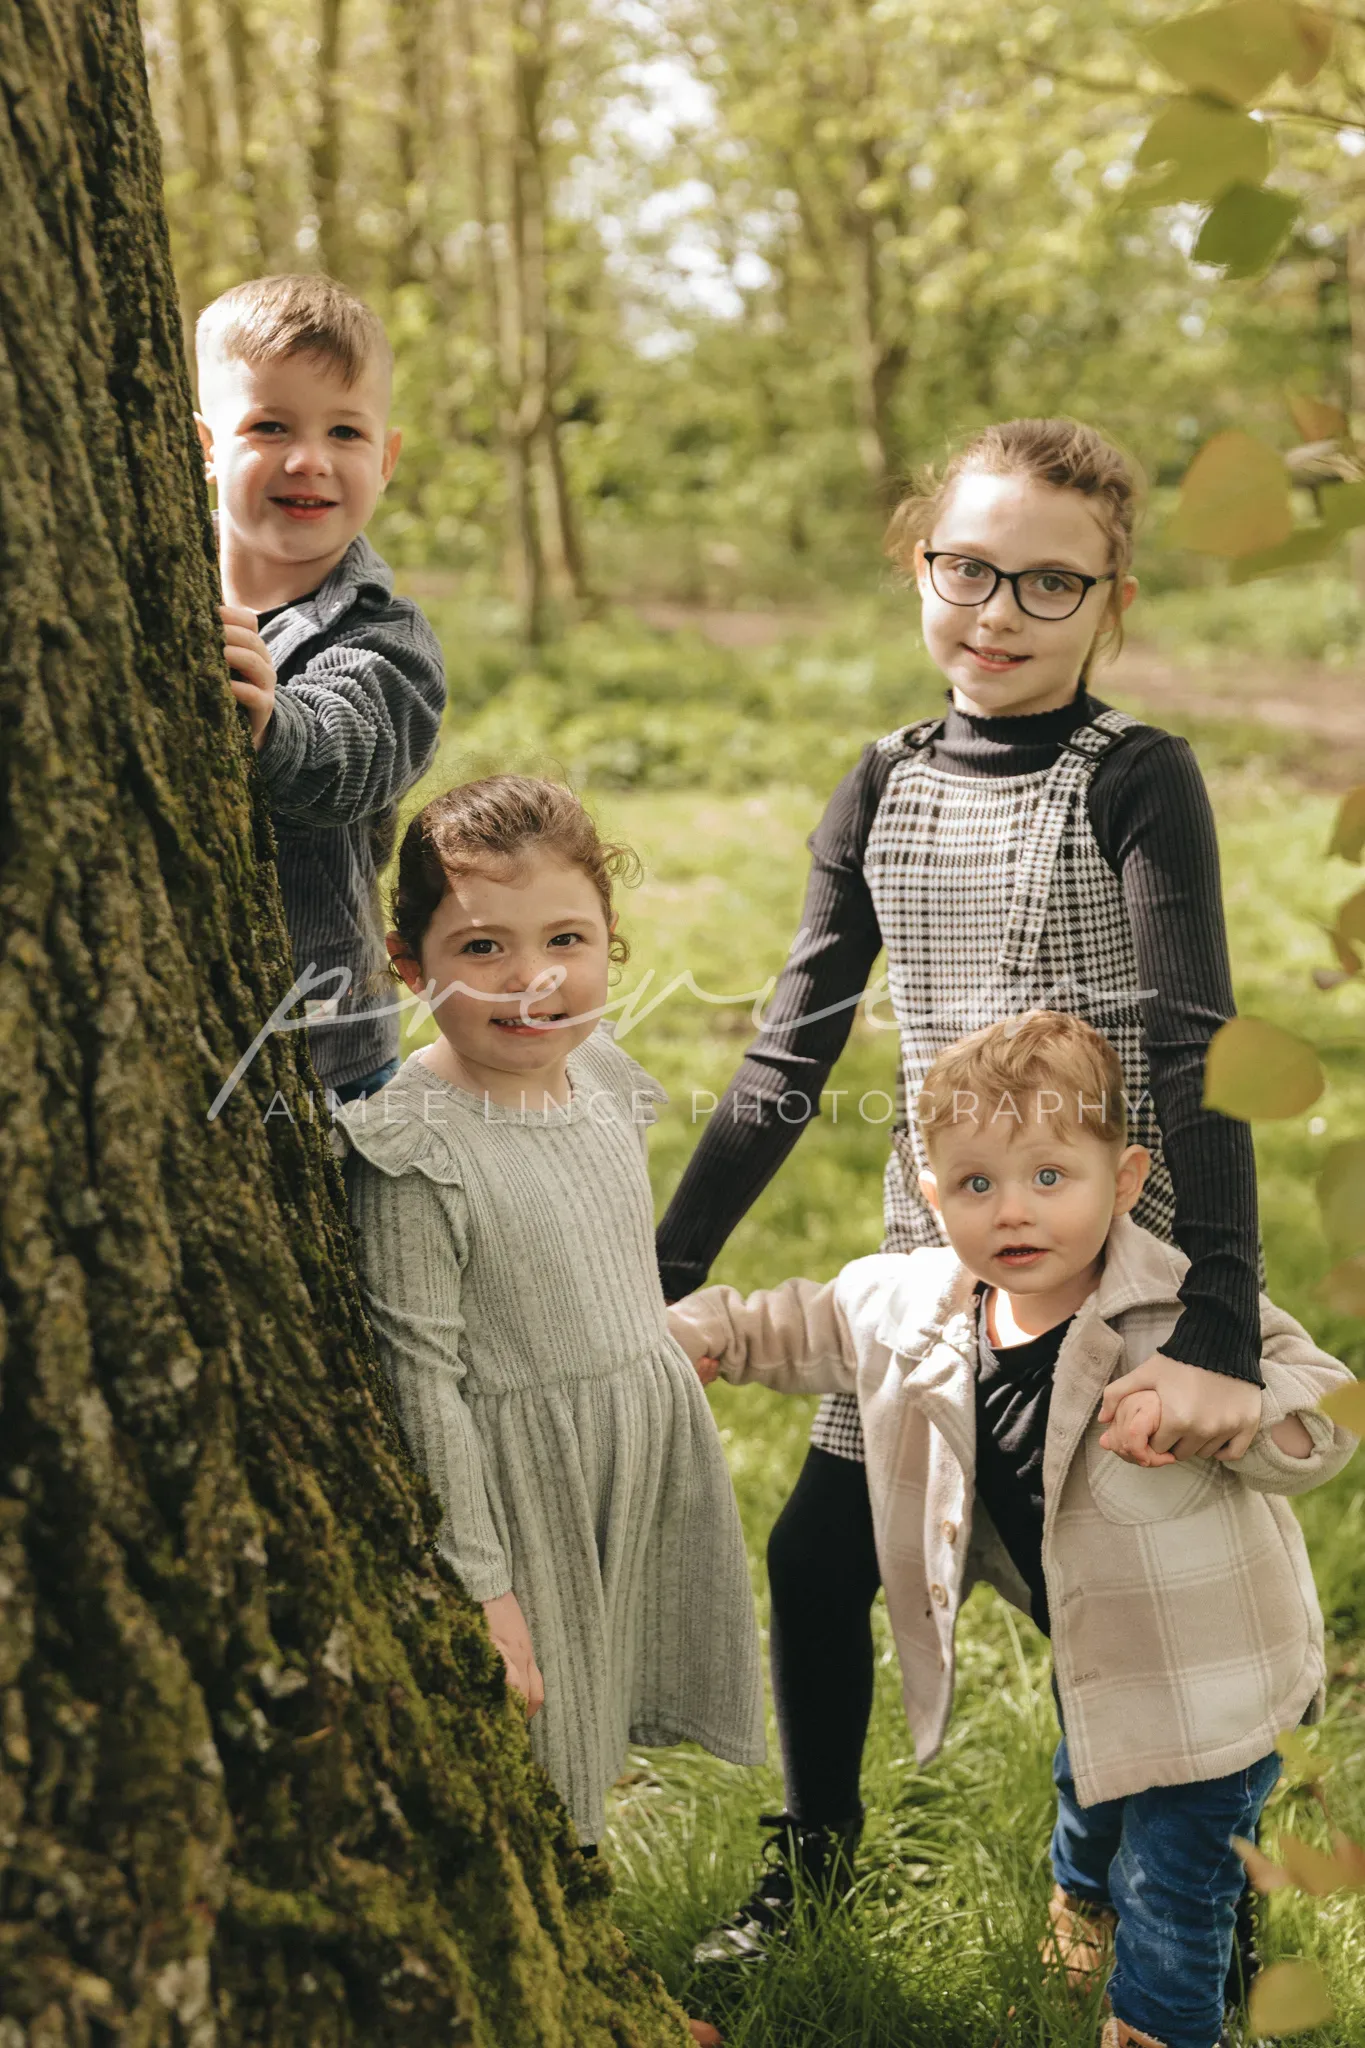 Four children of varying ages stand playfully behind a tree in a sunlit forest. The two girls, including Gabrielle, wear dresses and the two boys are in shirts and vests. They all smile